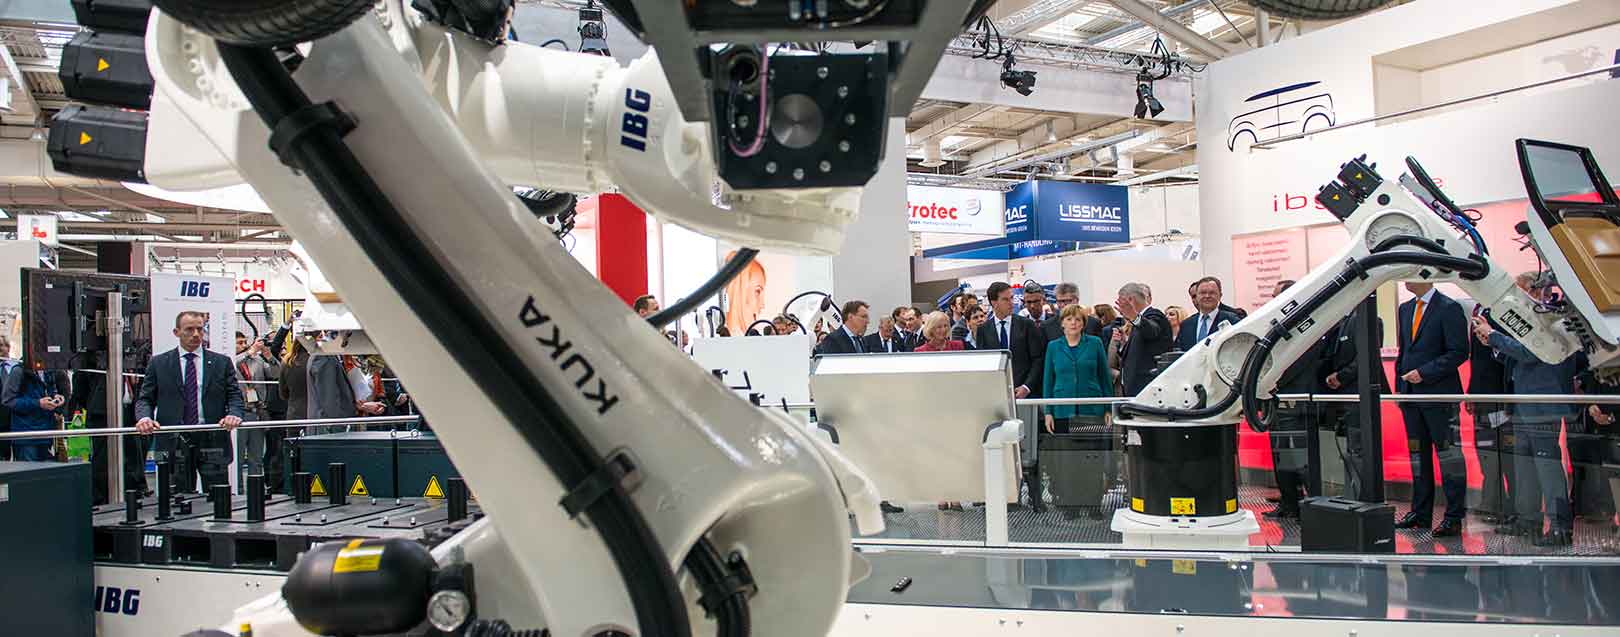 India to pitch manufacturing in Hannover 2016 